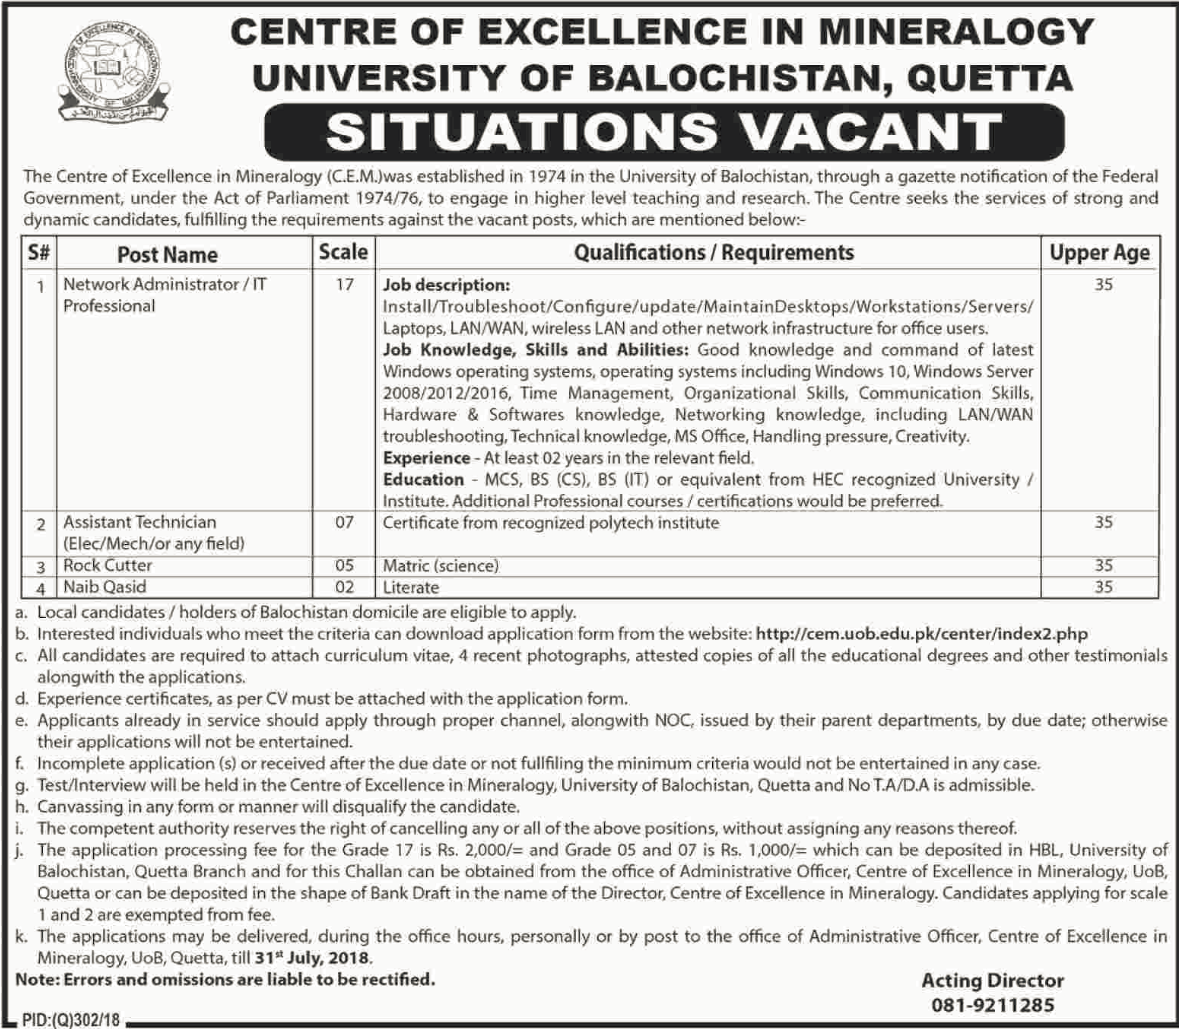 Centre of Excellence in Mineralogy University of Balochistan Quetta Jobs For Network Administrator, IT Professional & Others